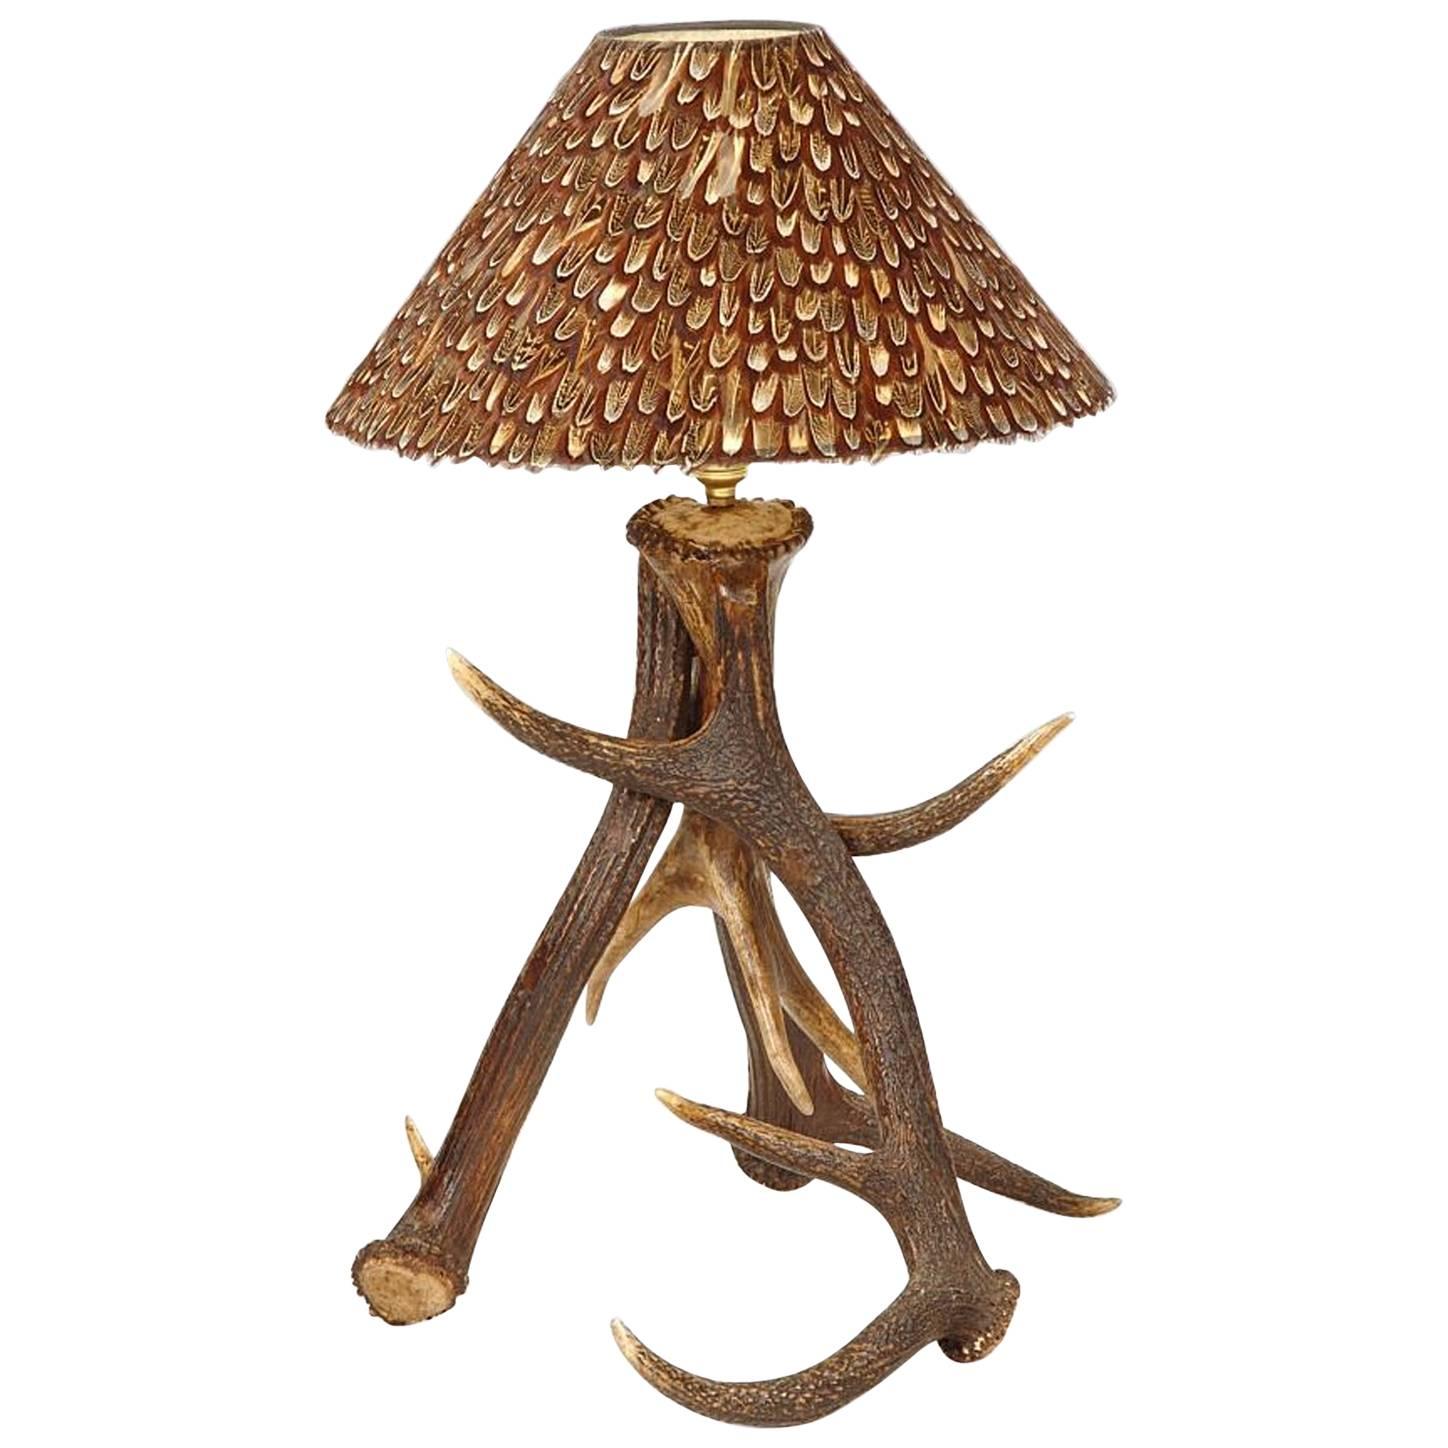 Three Antlers Table Lamp with Partridge Feather Lamp Shade